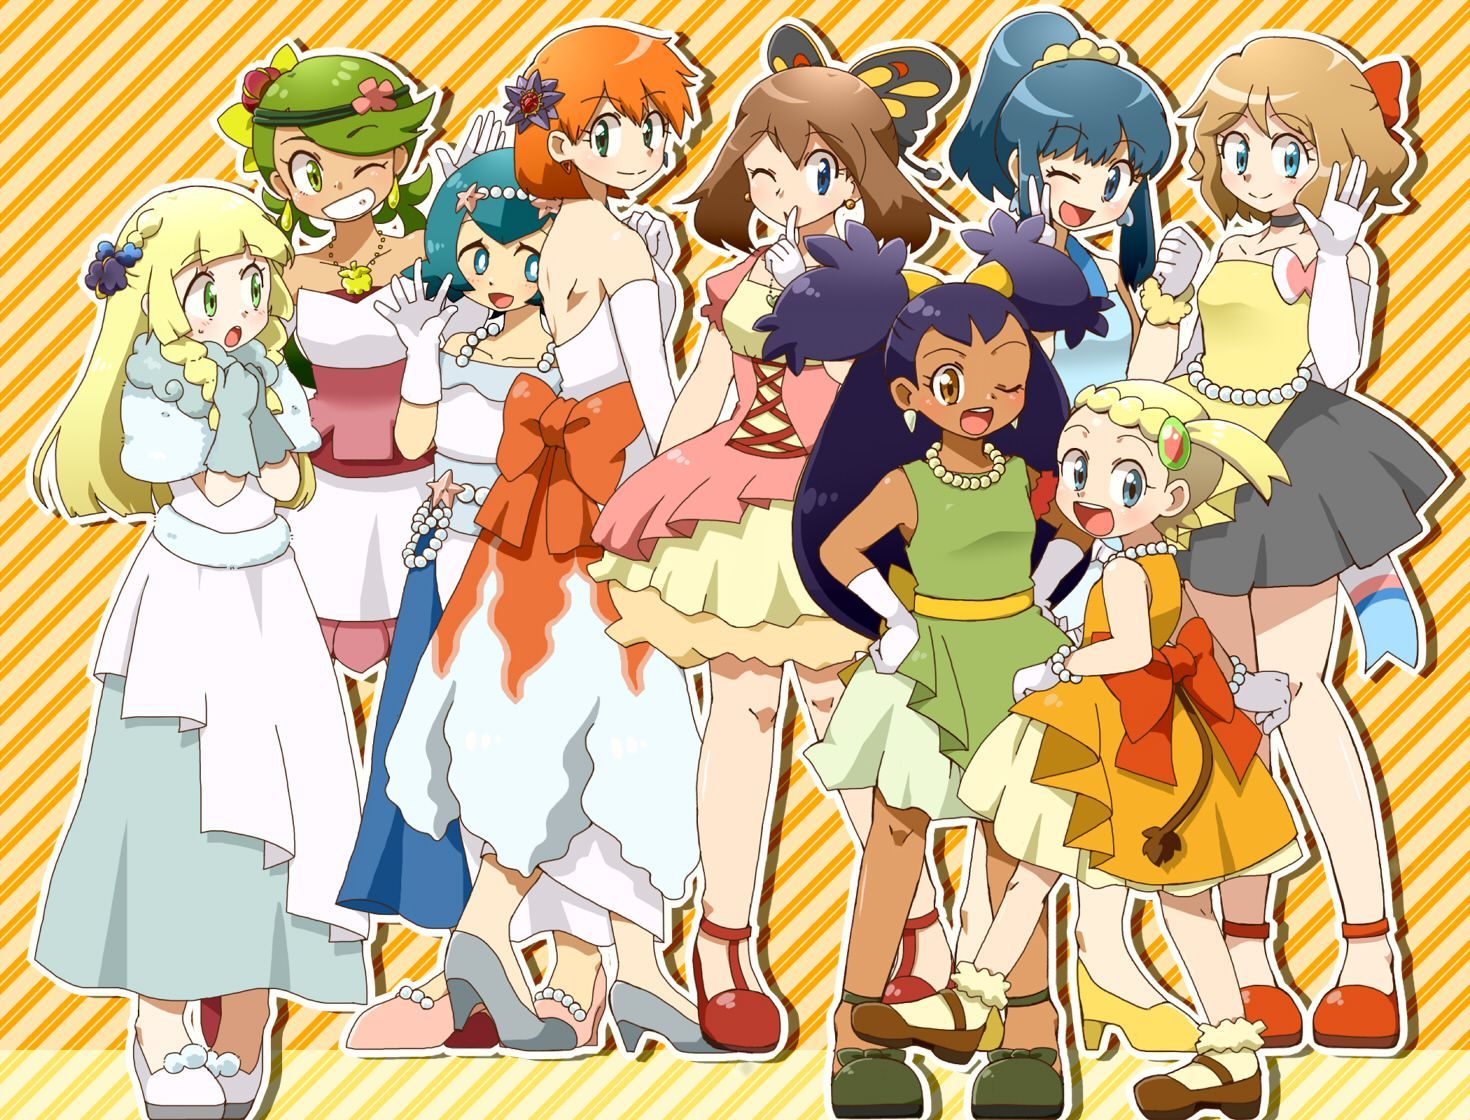 View and download this 1470x1120 Pokémon (Anime) image with 12 favorites, or browse the gallery. Anime, Pokemon characters, Pokemon